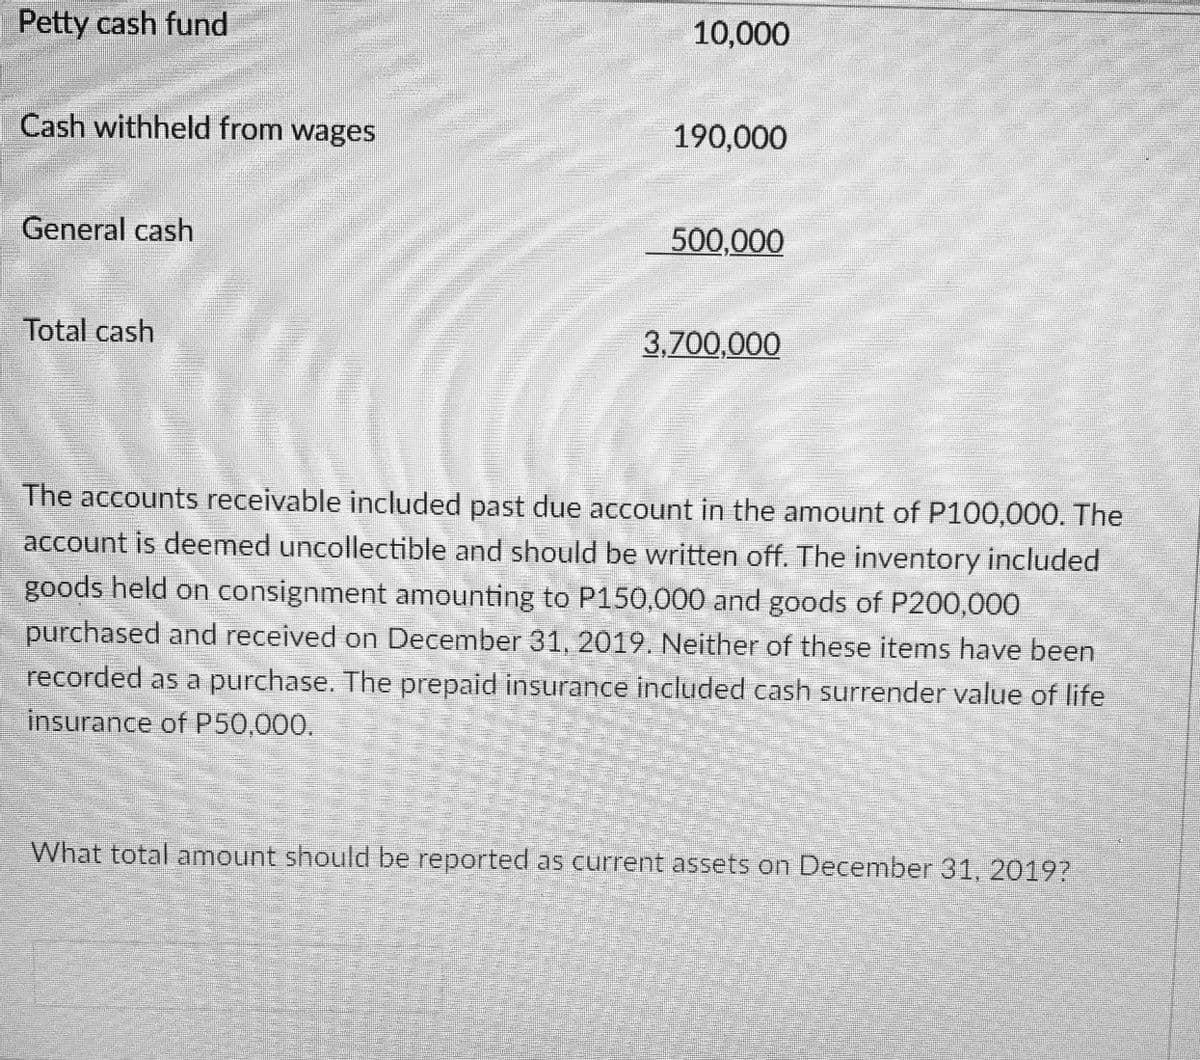 Petty cash fund
10,000
Cash withheld from wages
190,000
General cash
500,000
Total cash
3,700,000
The accounts receivable included past due account in the amount of P100,000. The
account is deemed uncollectible and should be written off. The inventory included
goods held on consignment amounting to P150,000 and goods of P200,000
purchased and received on December 31, 2019. Neither of these items have been
recorded as a purchase. The prepaid insurance included cash surrender value of life
insurance of P50,000.
What total amount should be reported as current assets on December 31, 20197
